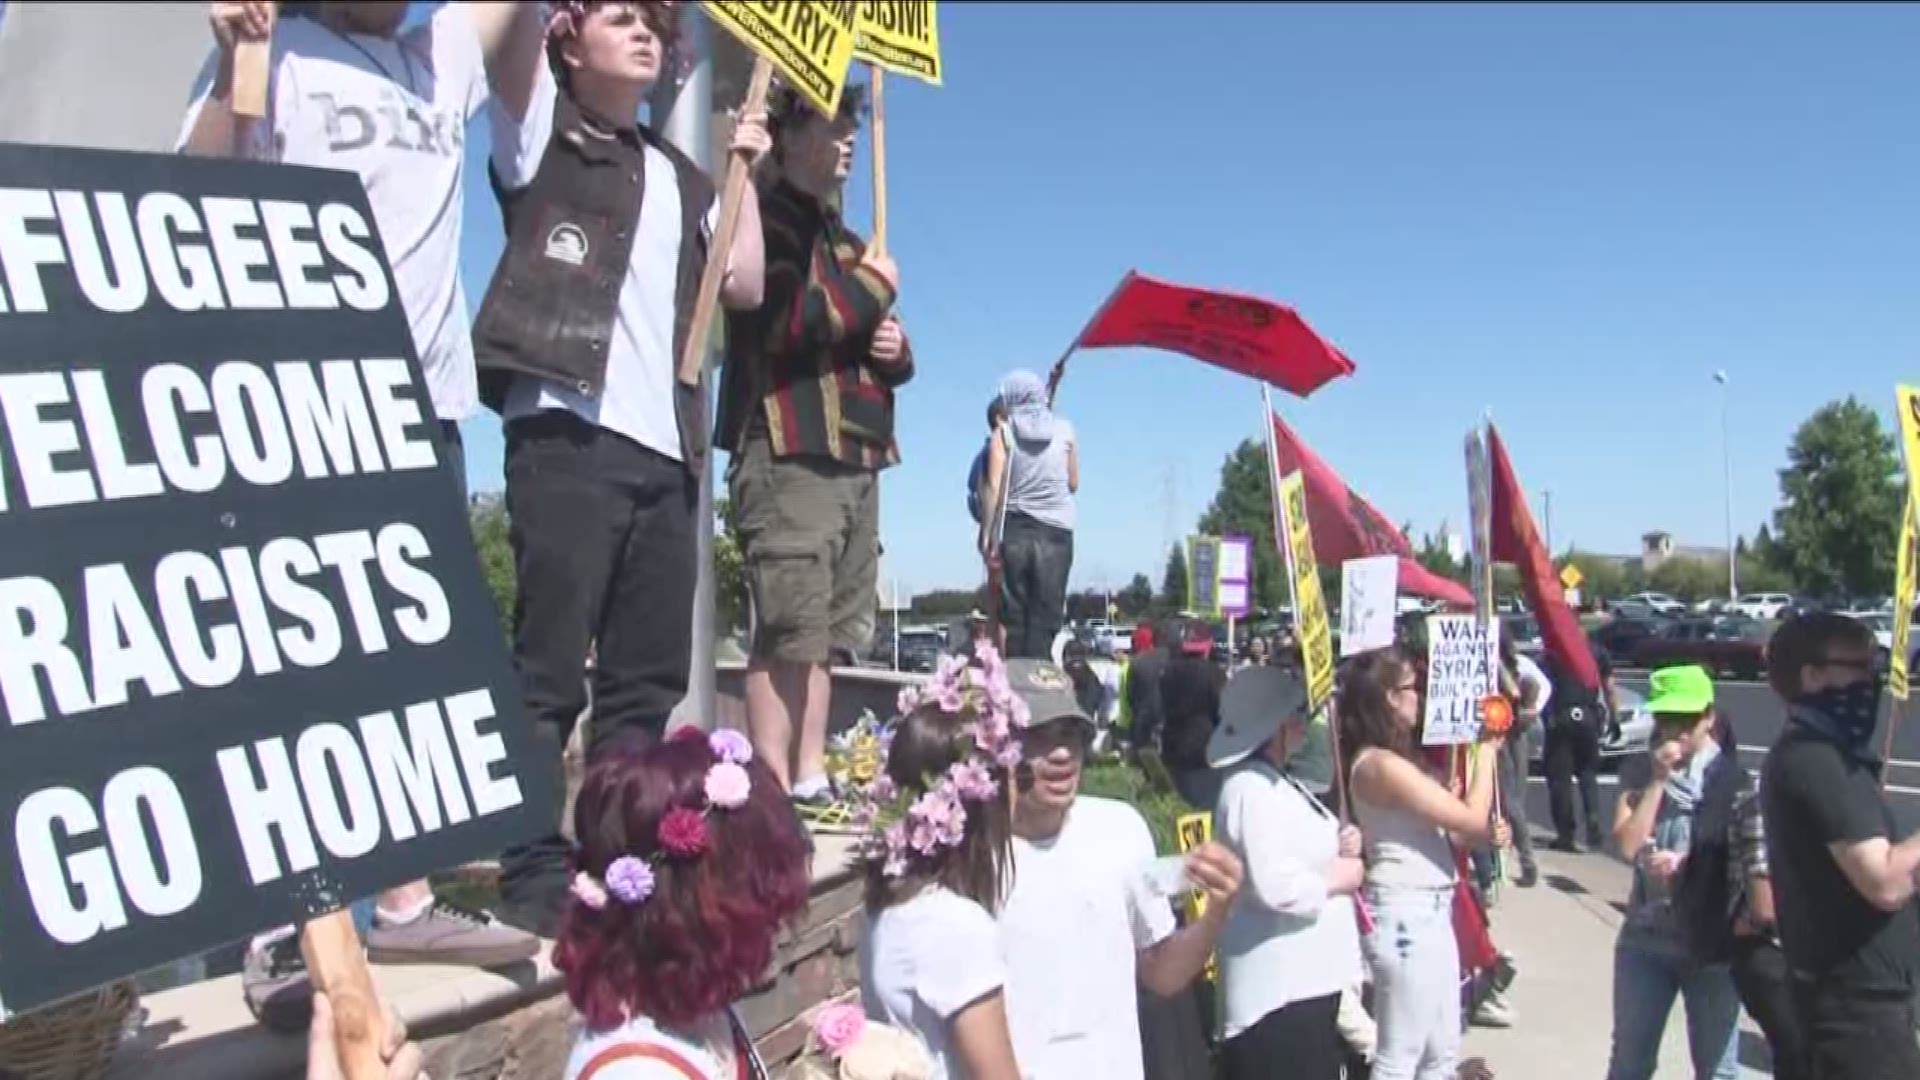 Hundreds of demonstrators gathered outside 'The Fountains' in Roseville over an anti-Sharia law protest. 